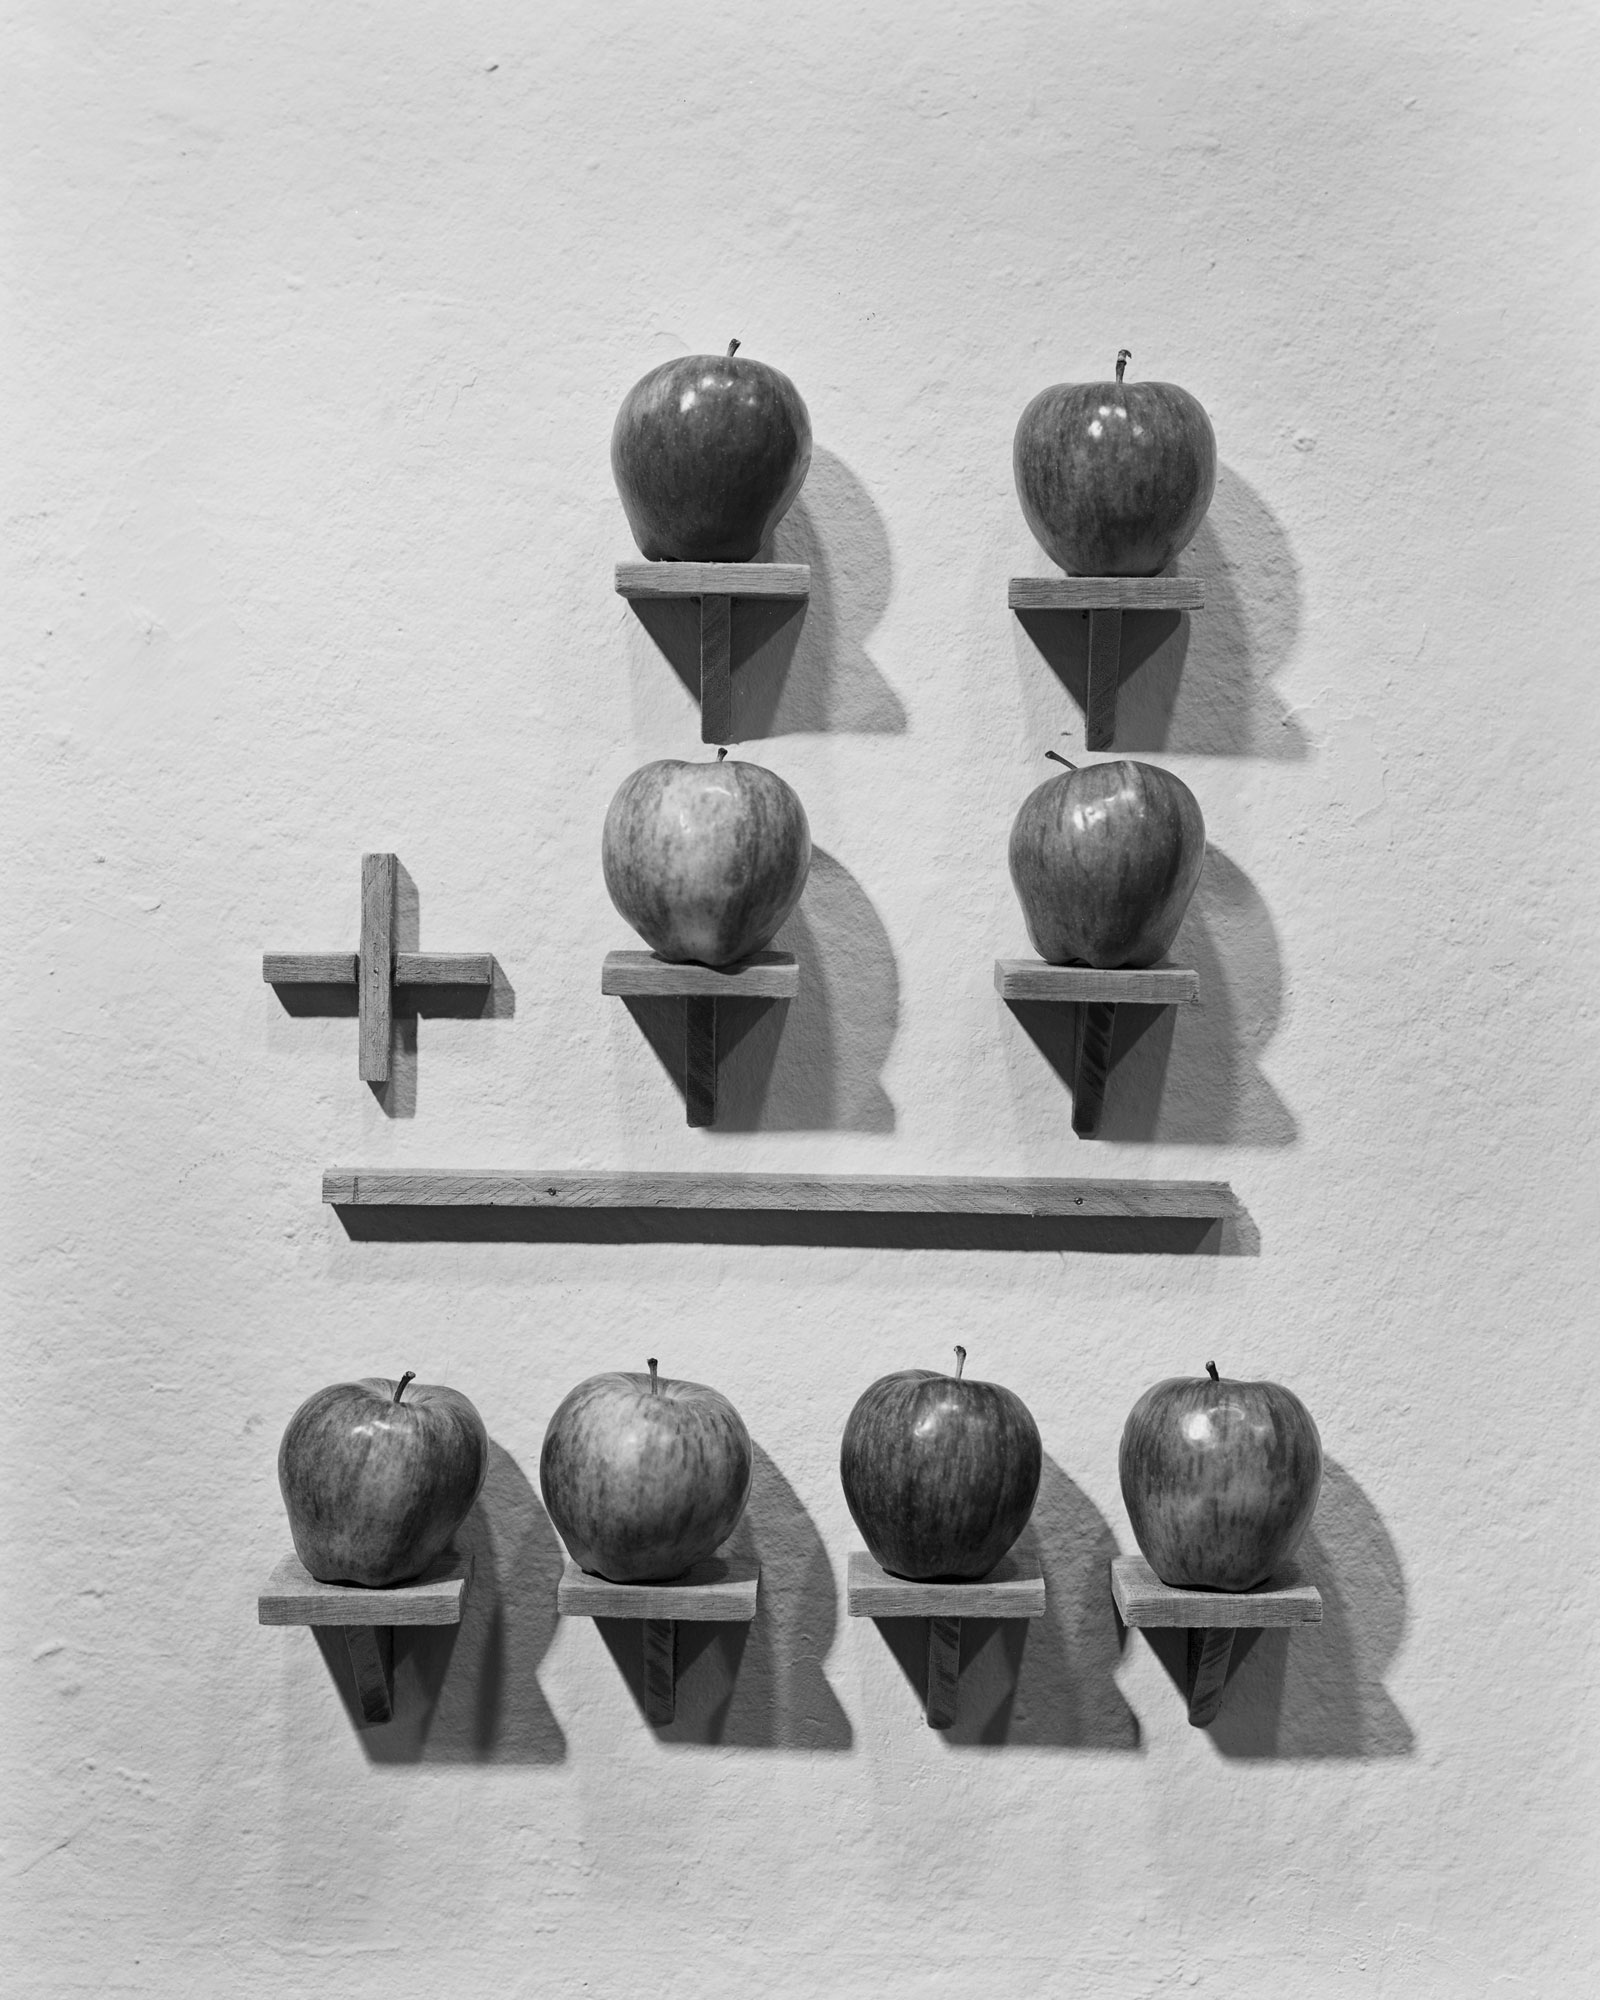 Two-Apples-Plus-Two-Apples-Equals-Four-Apples,-1974_2020